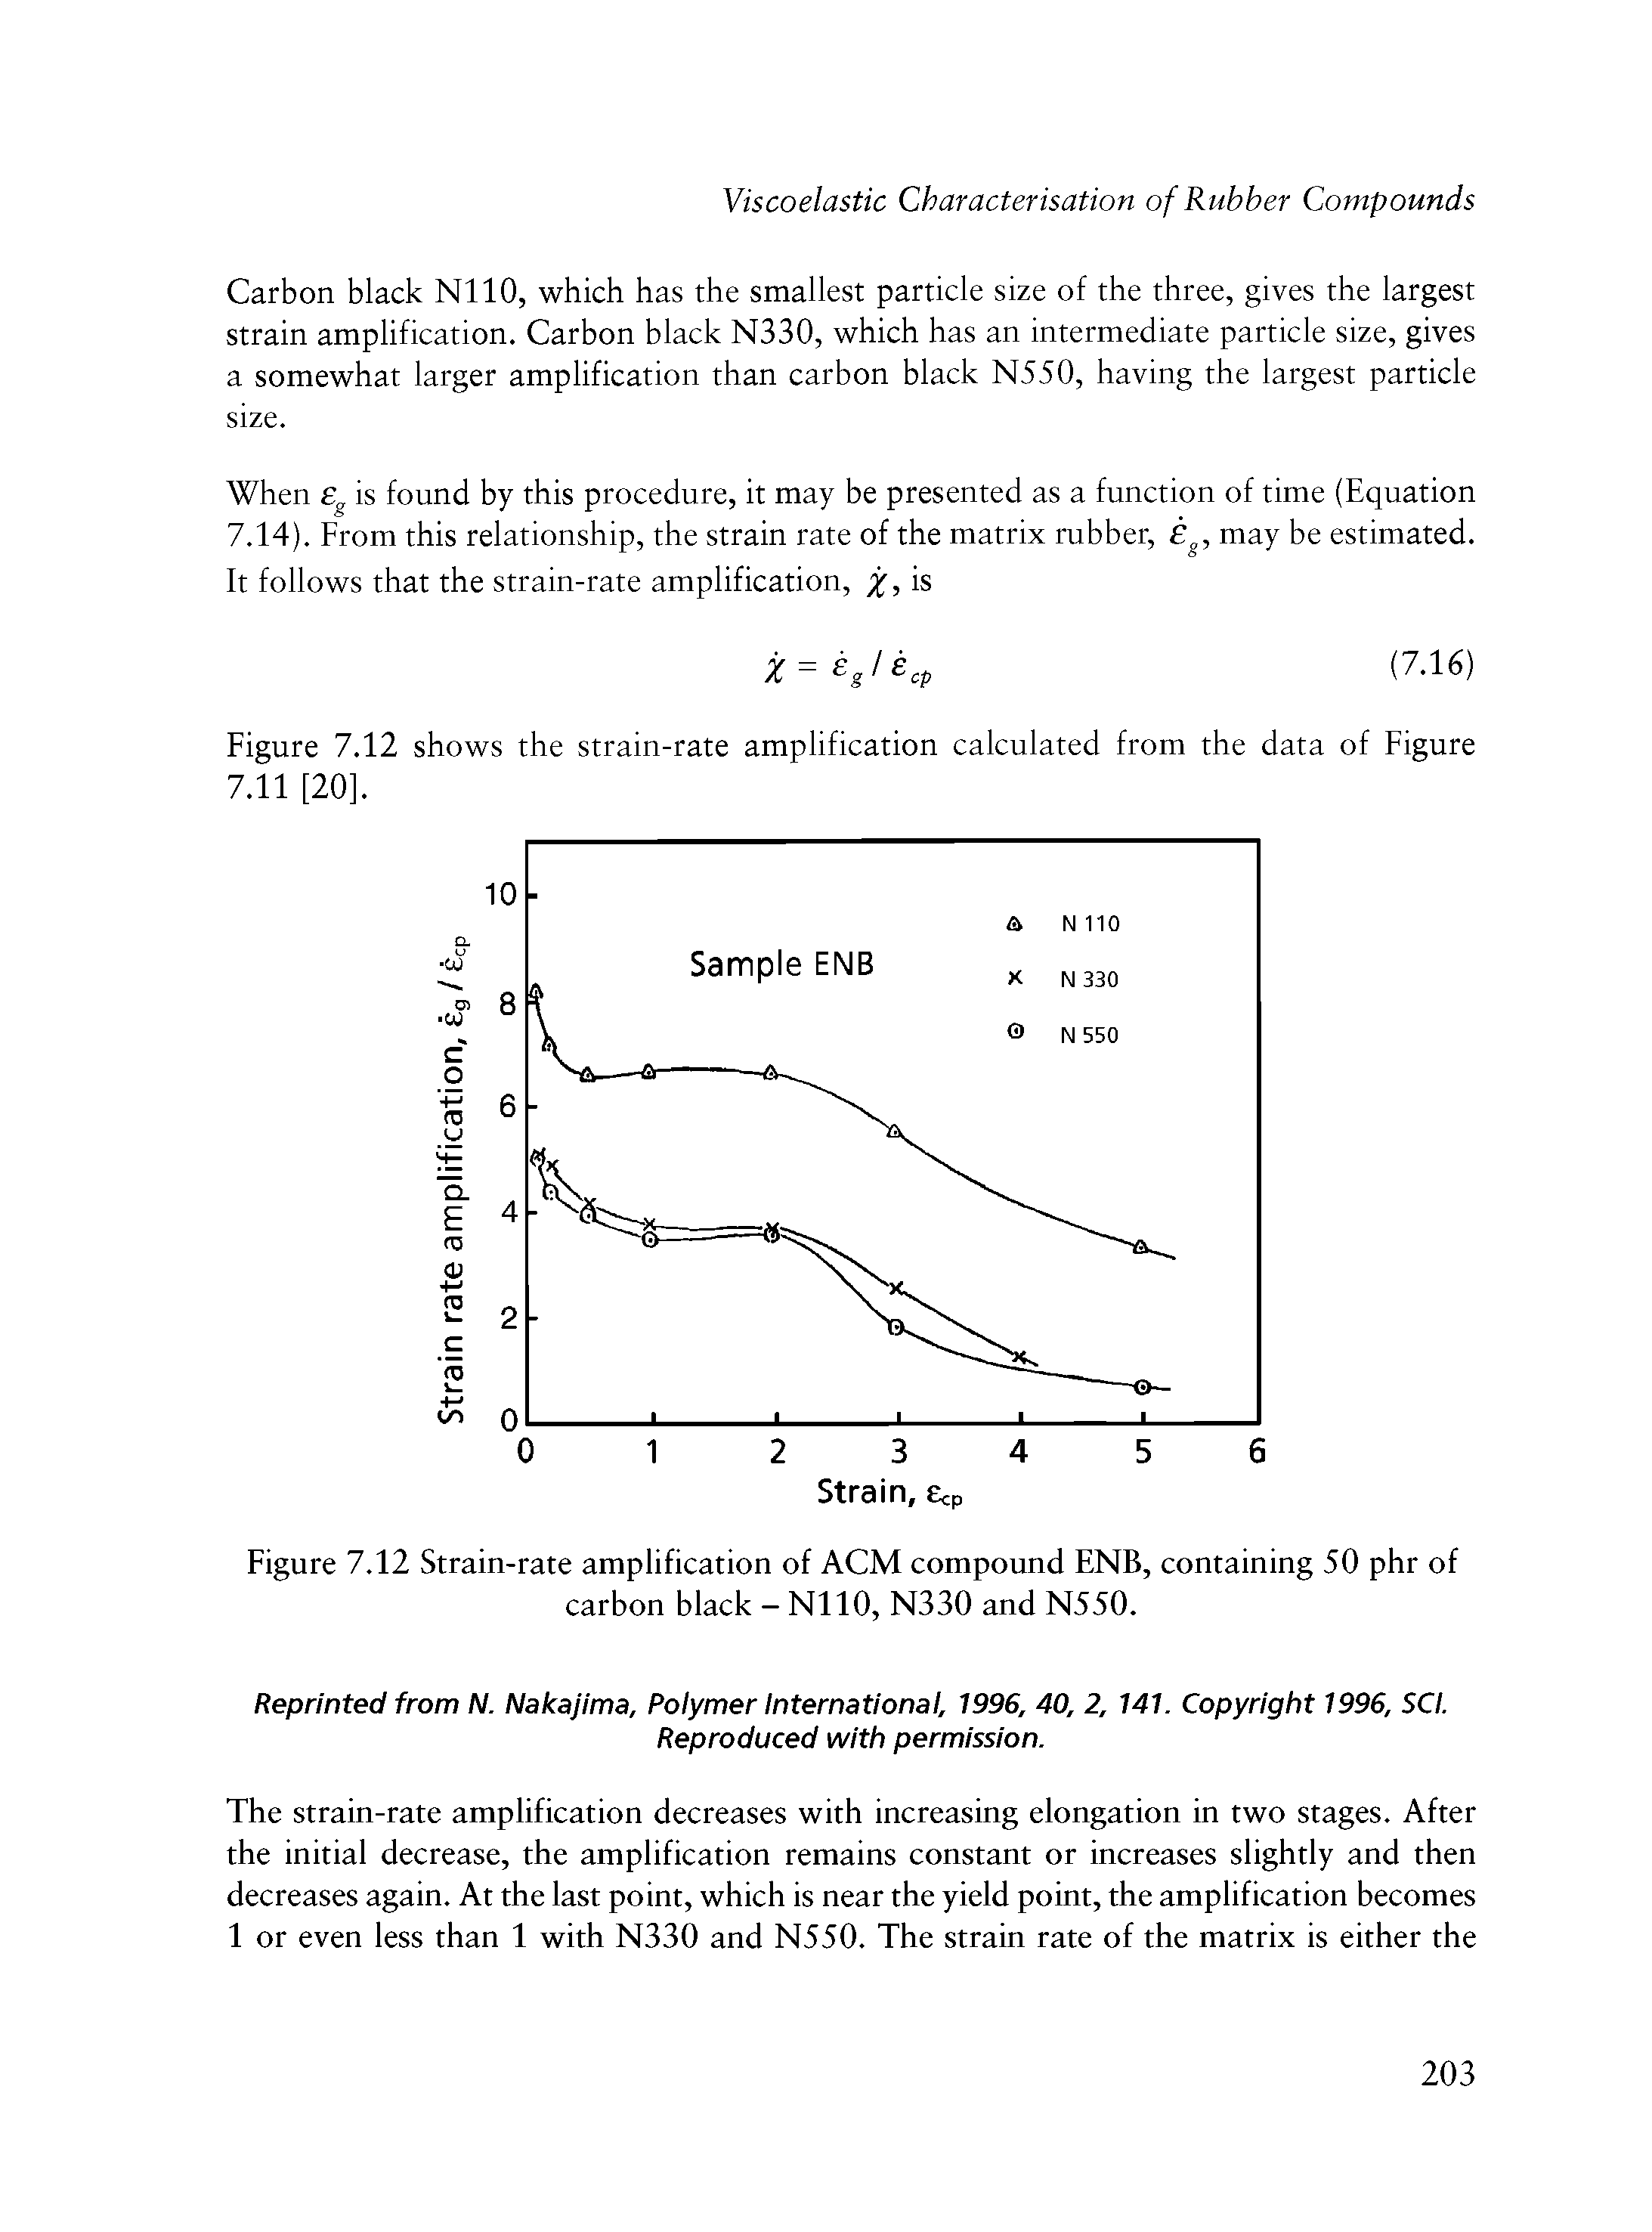 Figure 7.12 Strain-rate amplification of ACM compound ENB, containing 50 phr of carbon black - NllO, N330 and N550.